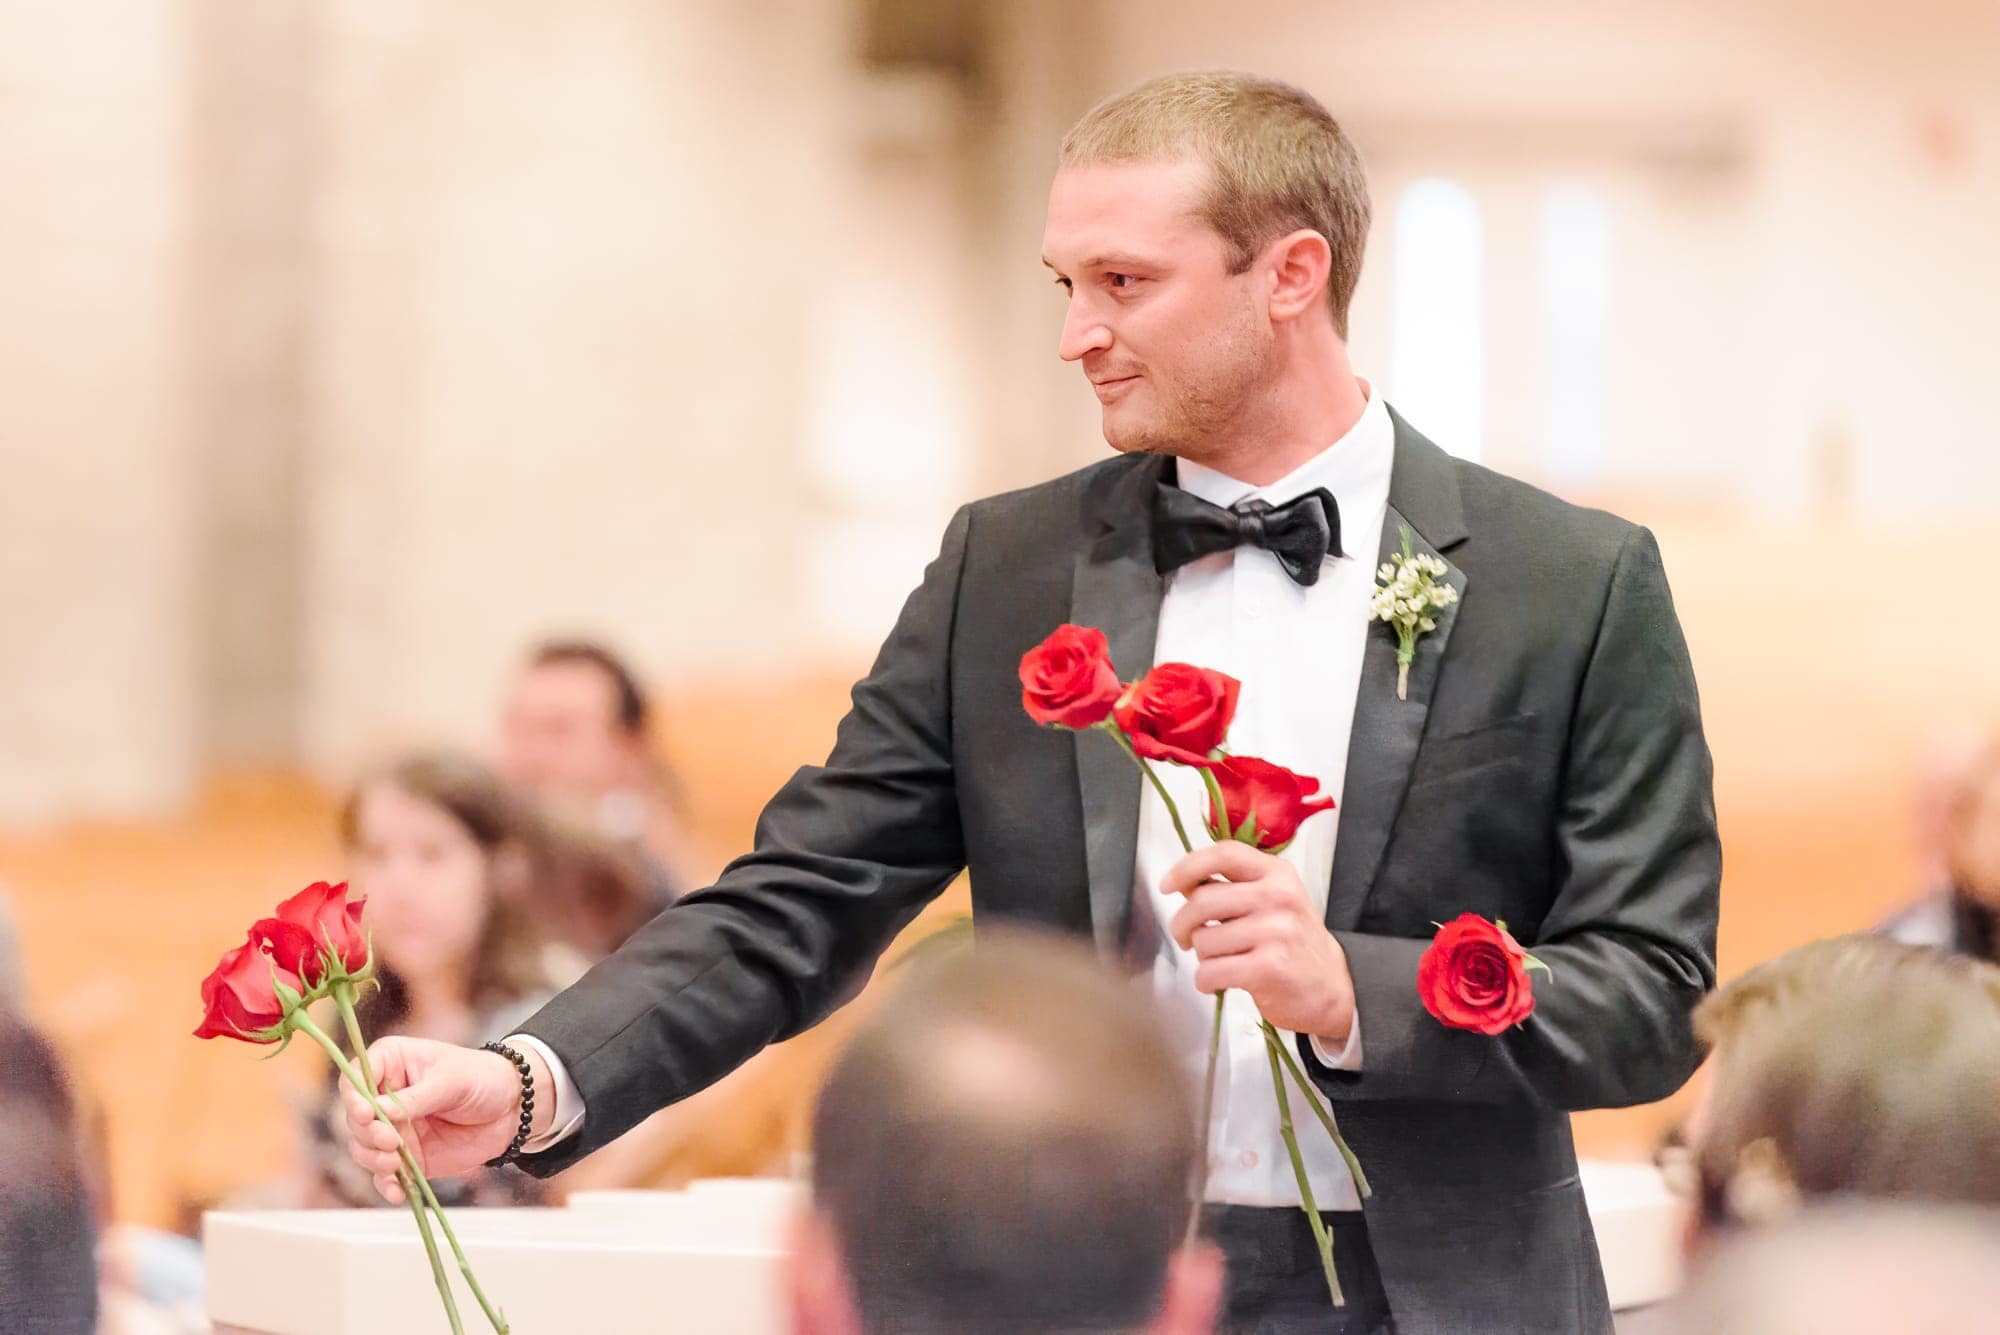 This Charlotte wedding at the Longview Country Club had an adult flower man instead of the traditional flower girl.